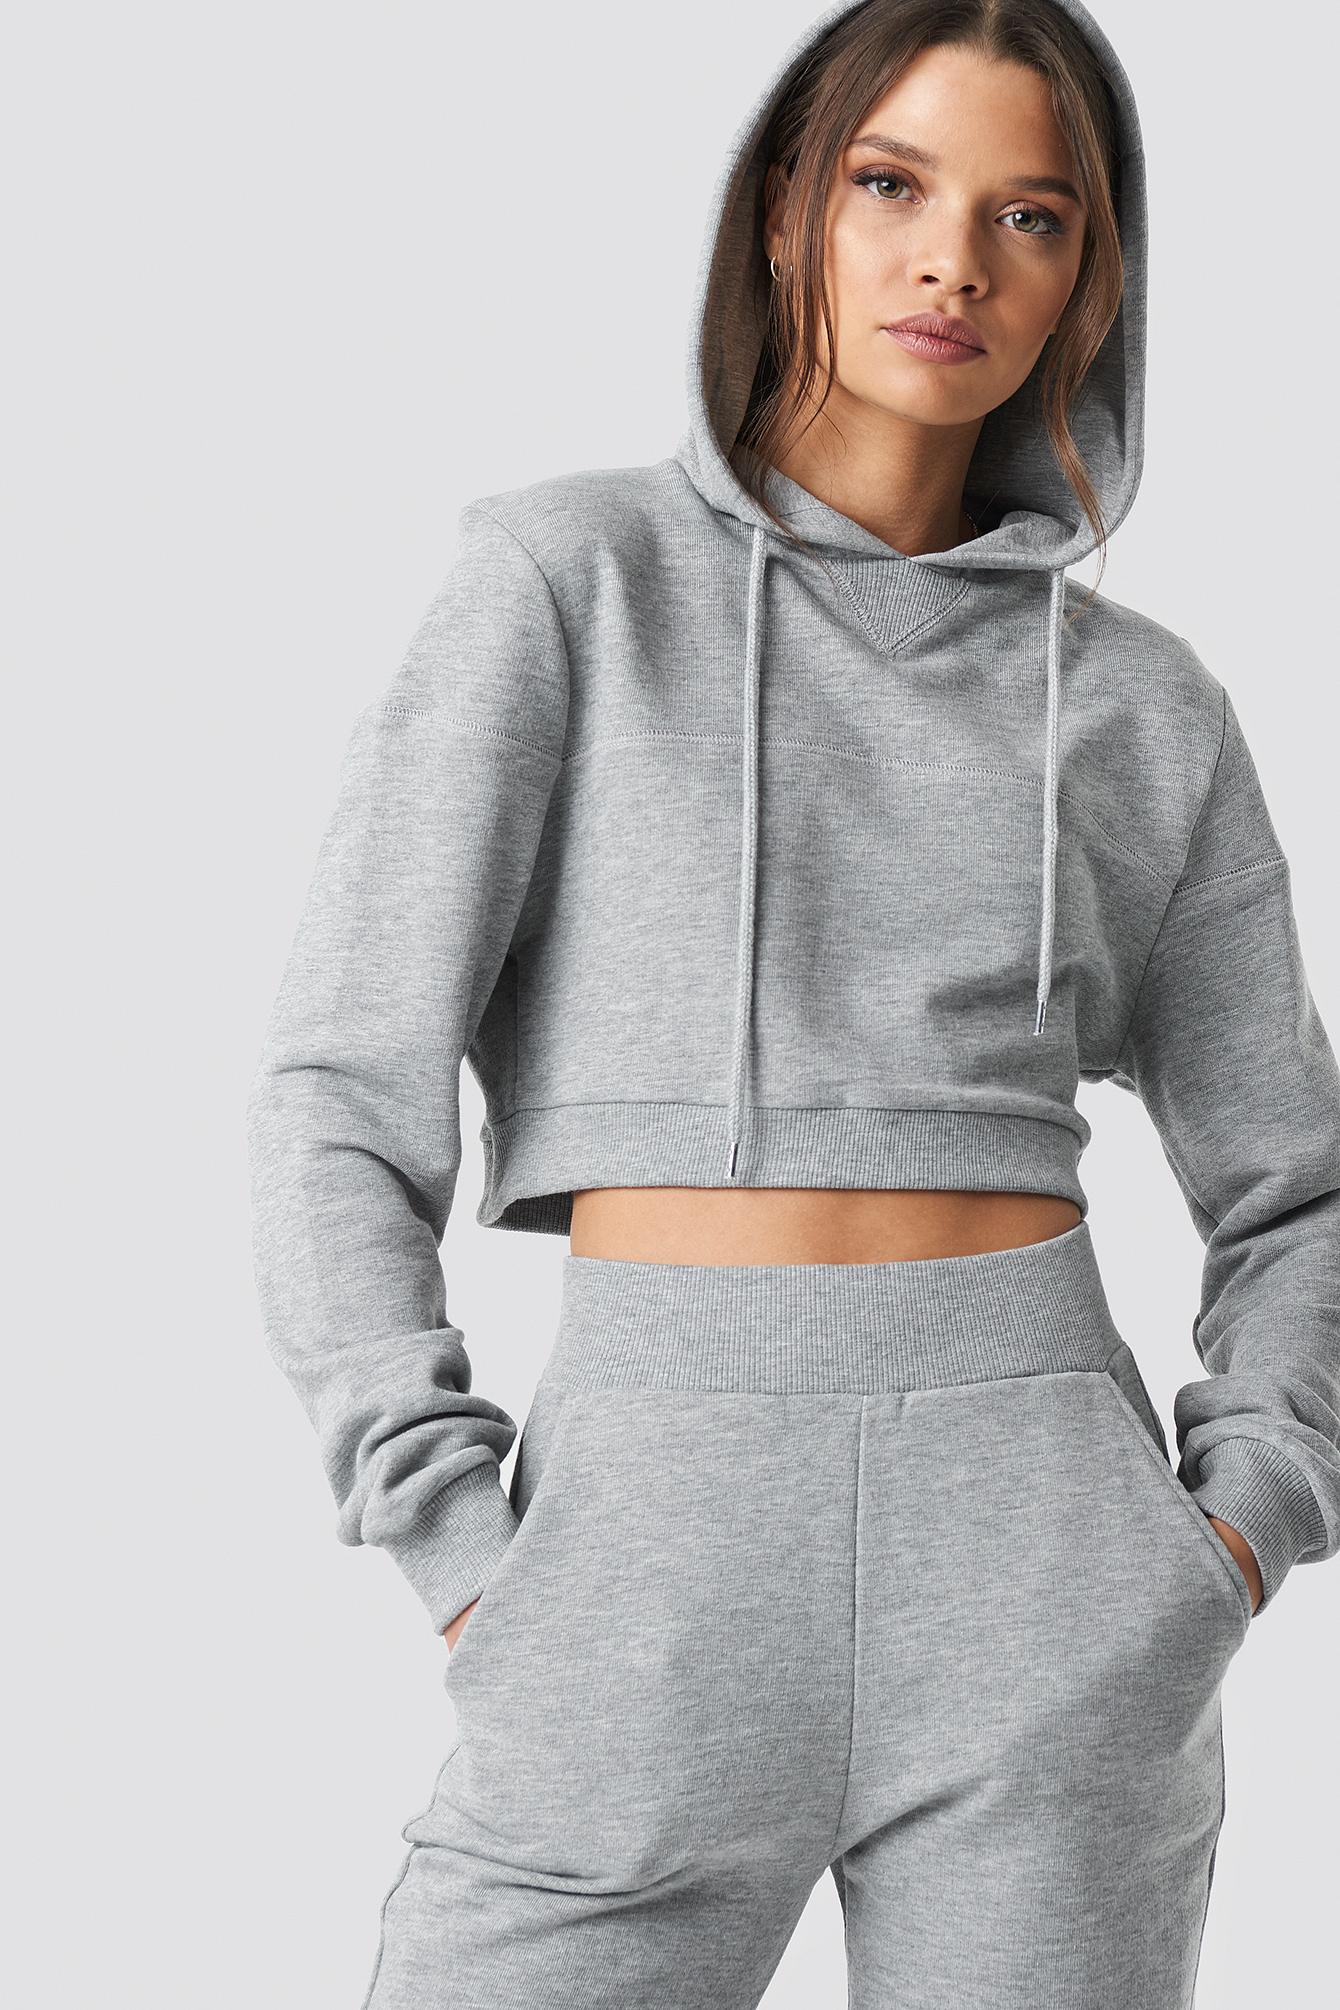 cropped hoodie and sweatpants